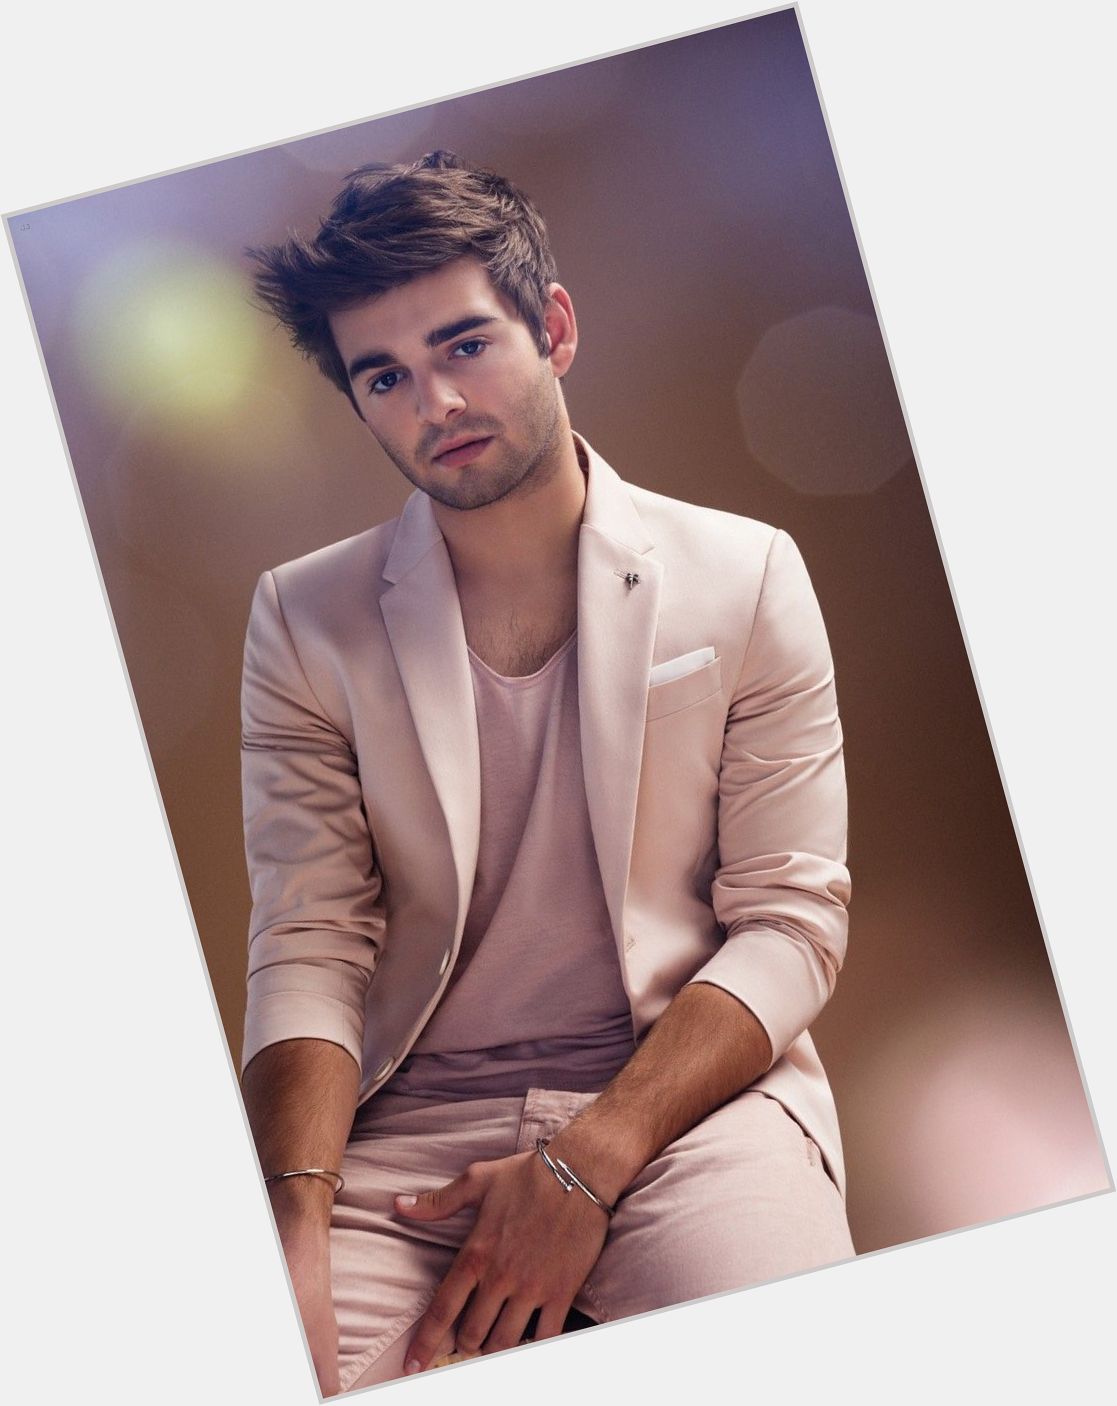 <a href="/hot-men/jack-griffo/is-he-single-christian-dating-ryan-newman-anyone">Jack Griffo</a> Athletic body,  dark brown hair & hairstyles